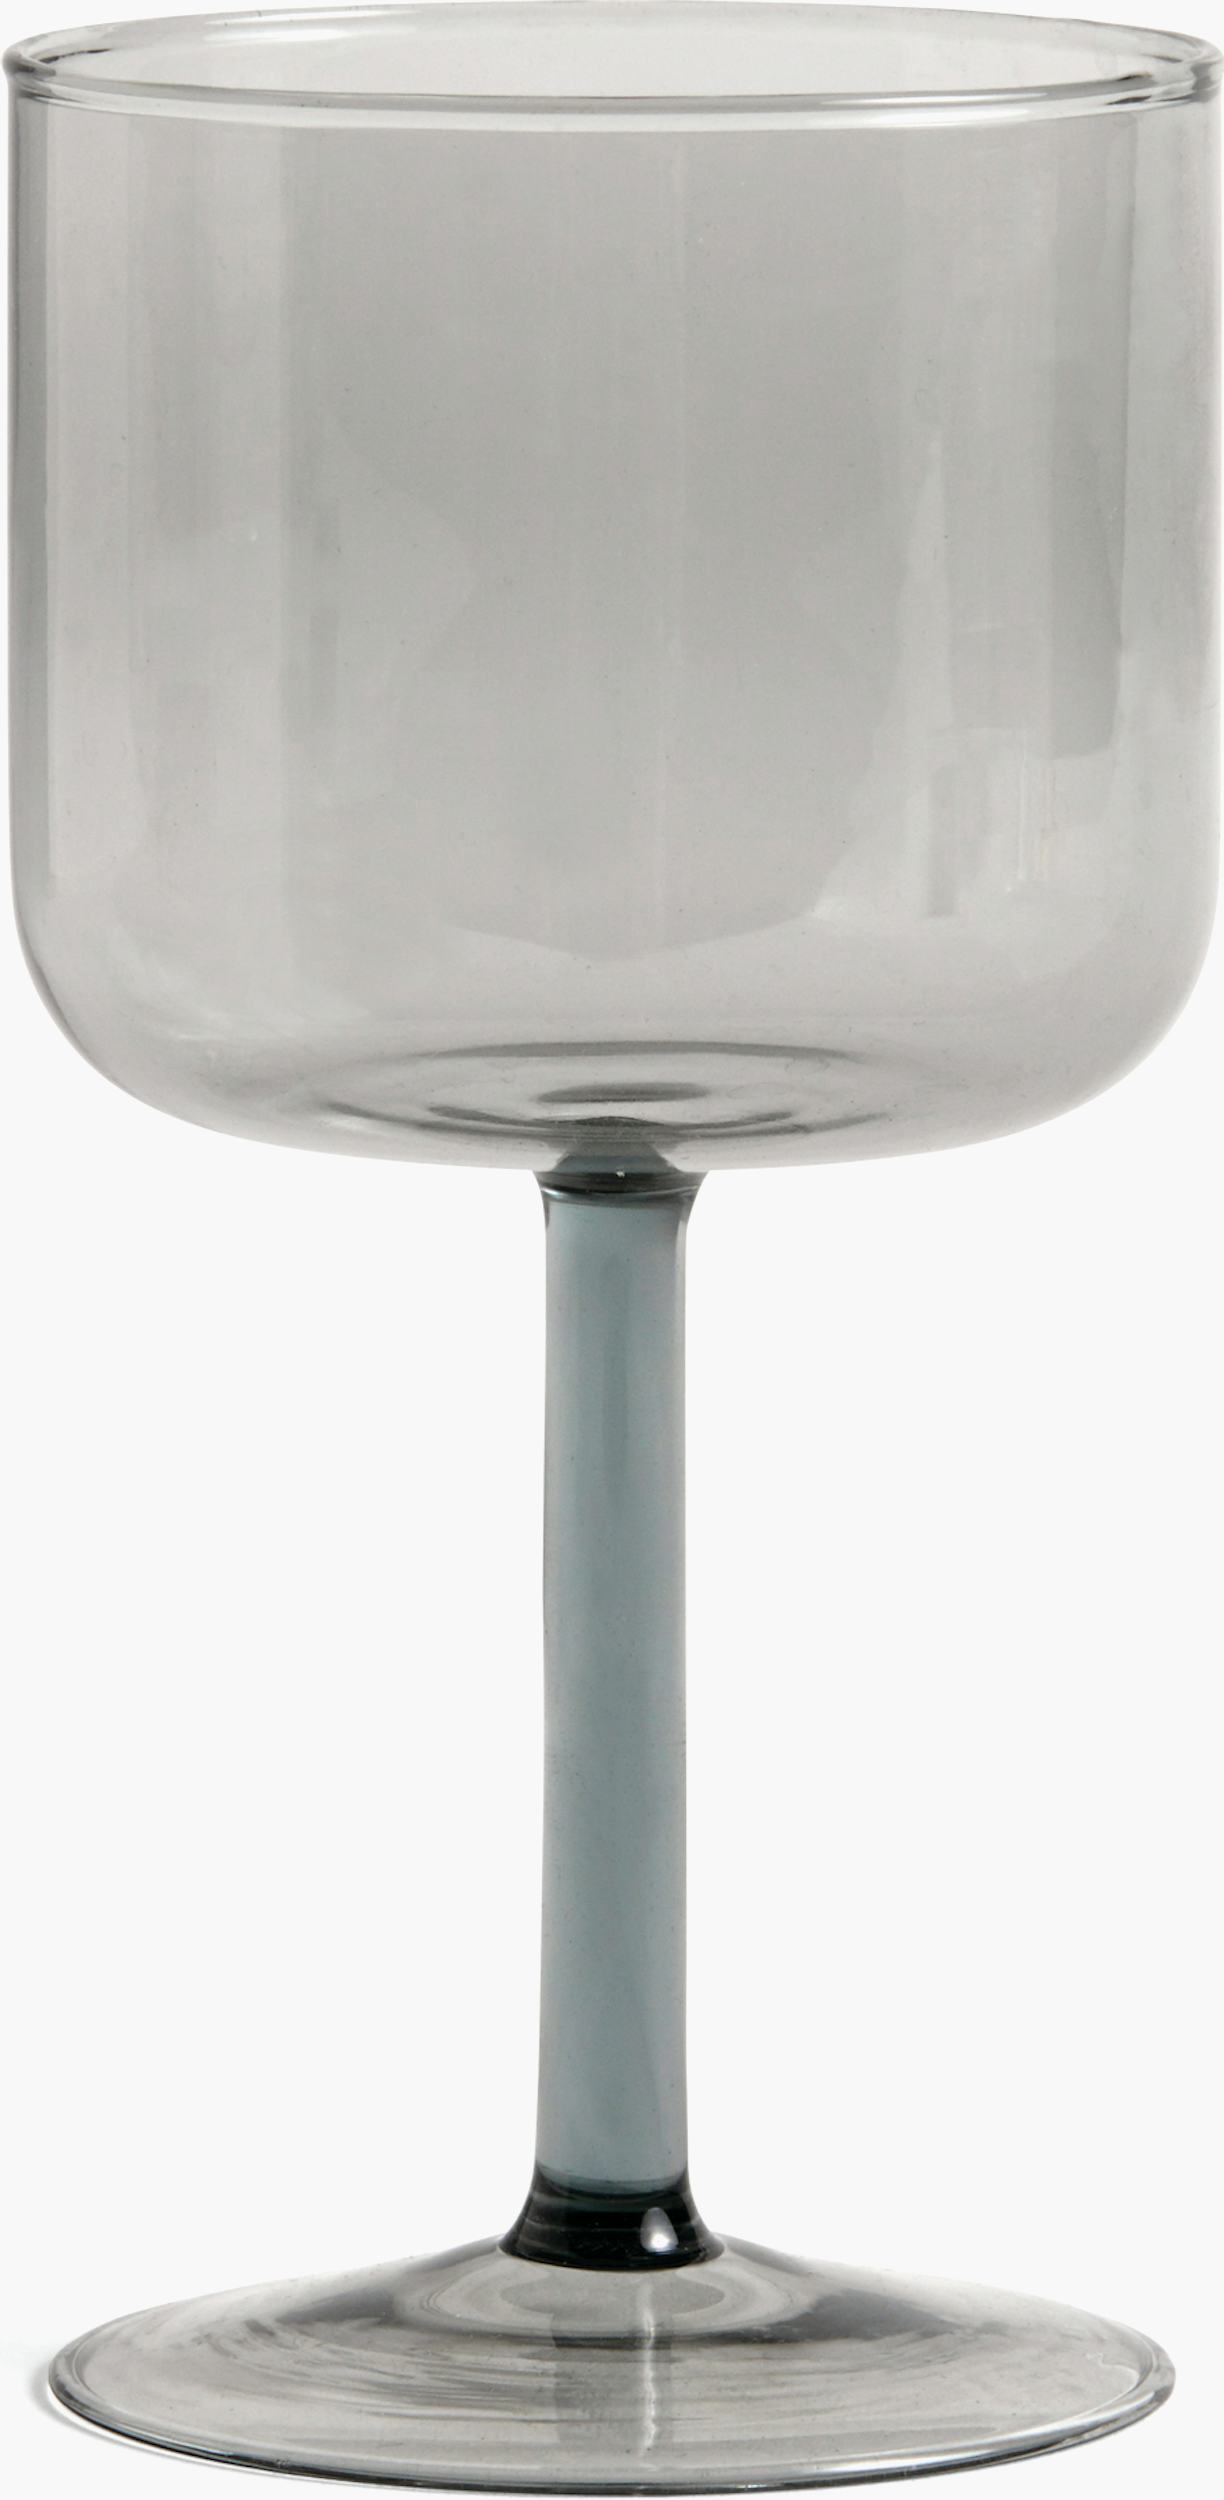 Tint Wine Glass, Grey at Design Within Reach